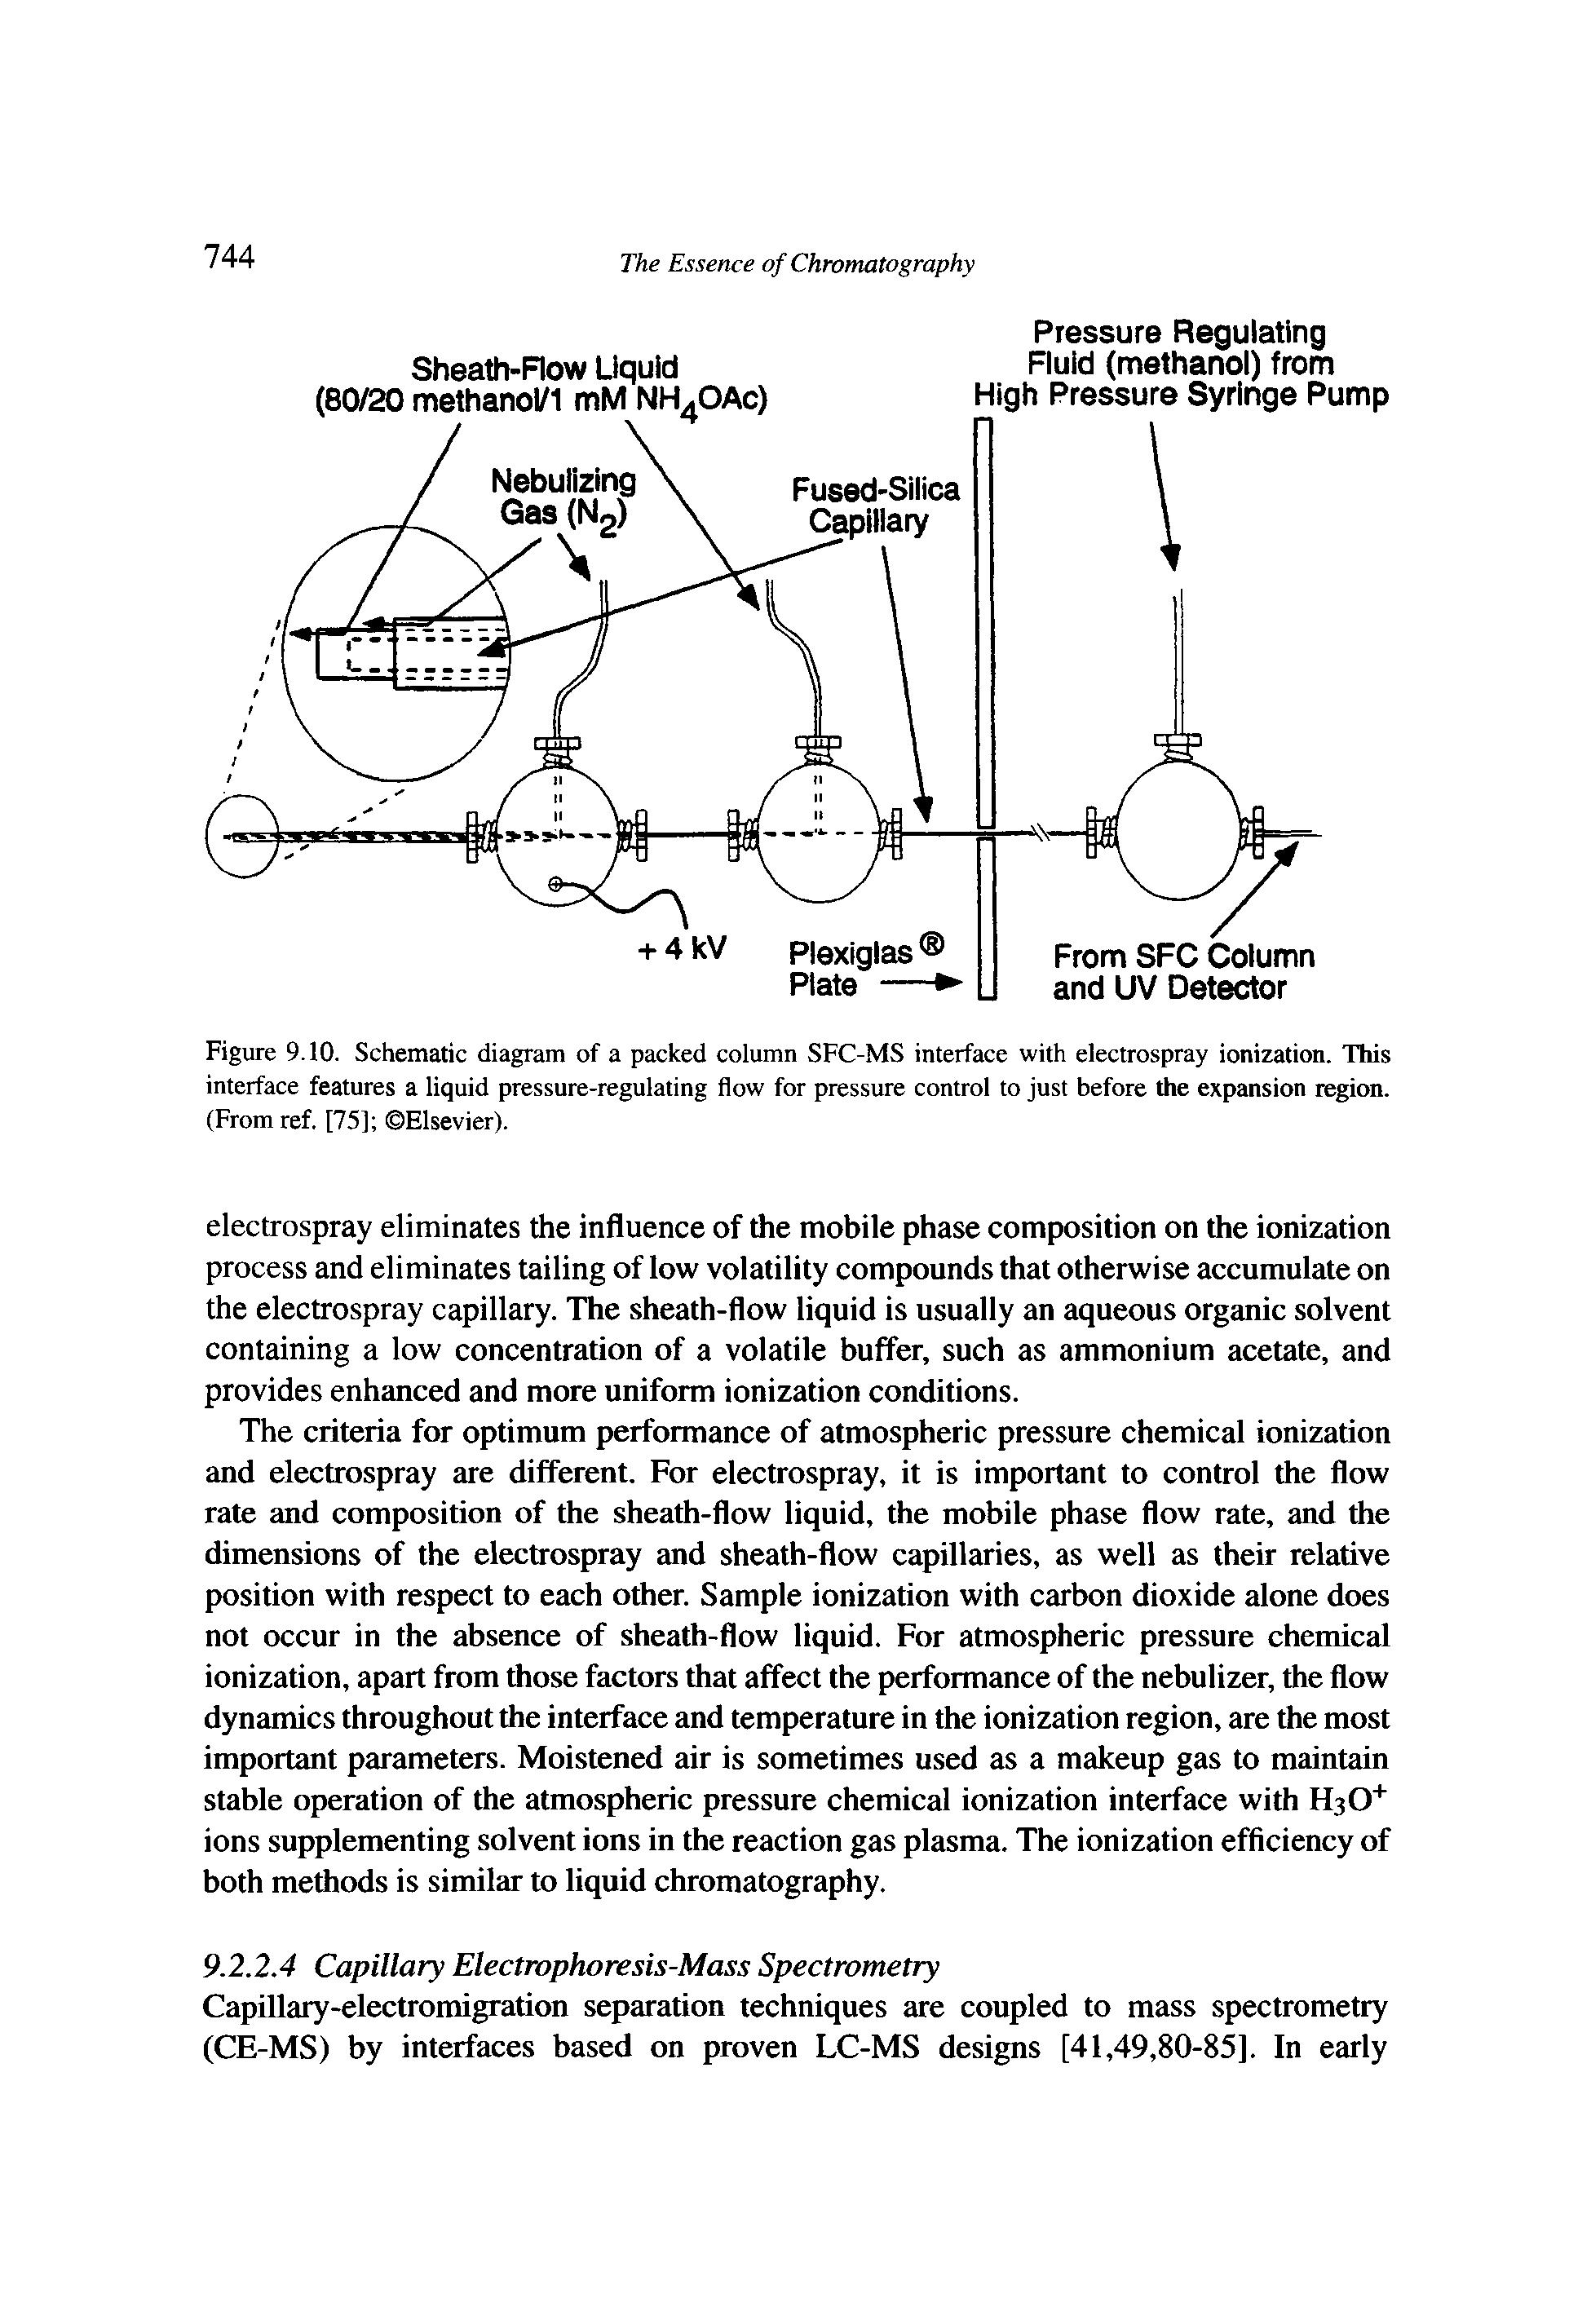 Figure 9.10. Schematic diagram of a packed column SFC-MS interface with electrospray ionization. This interface features a liquid pressure-regulating flow for pressure control to just before the expansion region. (From ref. [75] Elsevier).